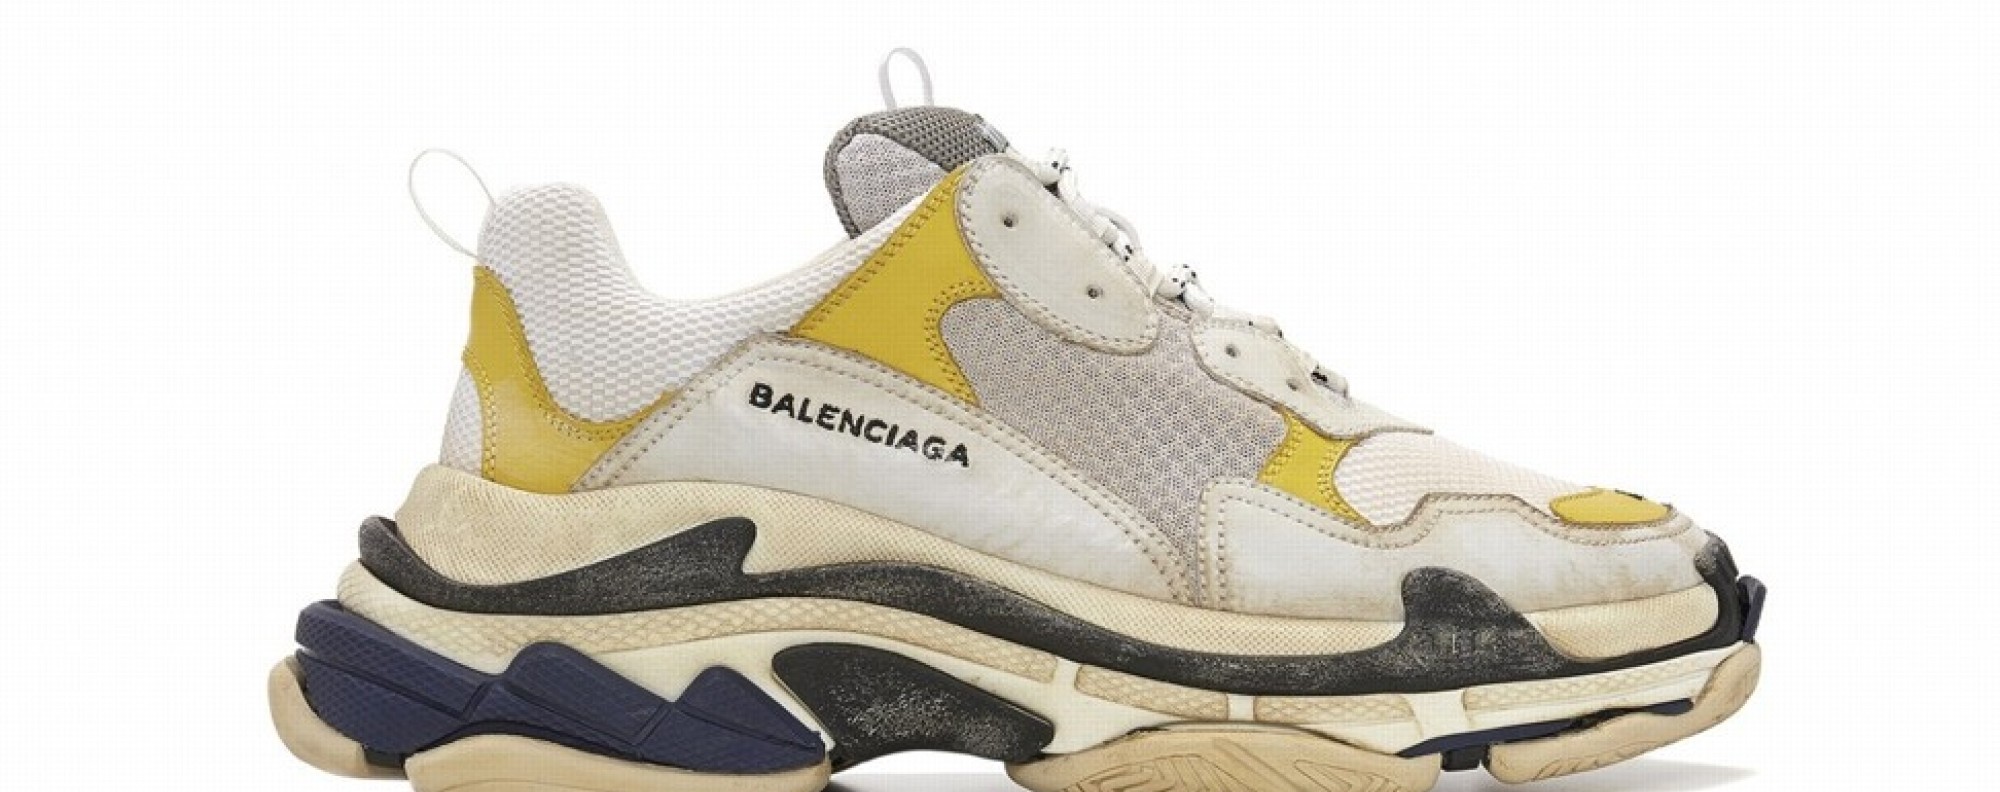 Chinese consumers divided over Balenciaga's in China' revelation | South Morning